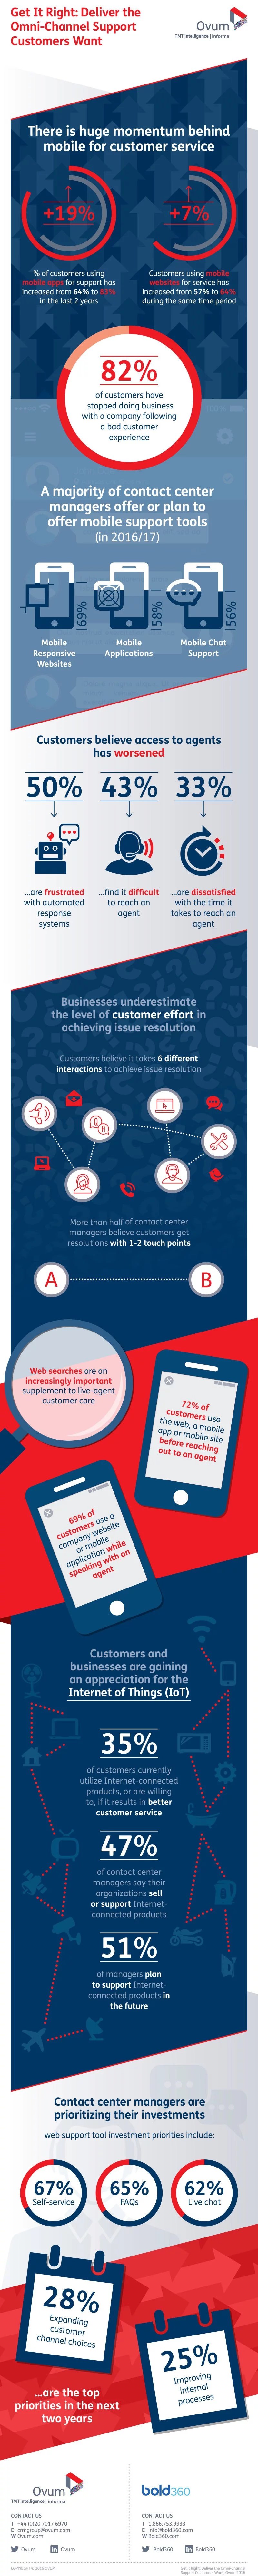 omni channel support infographic